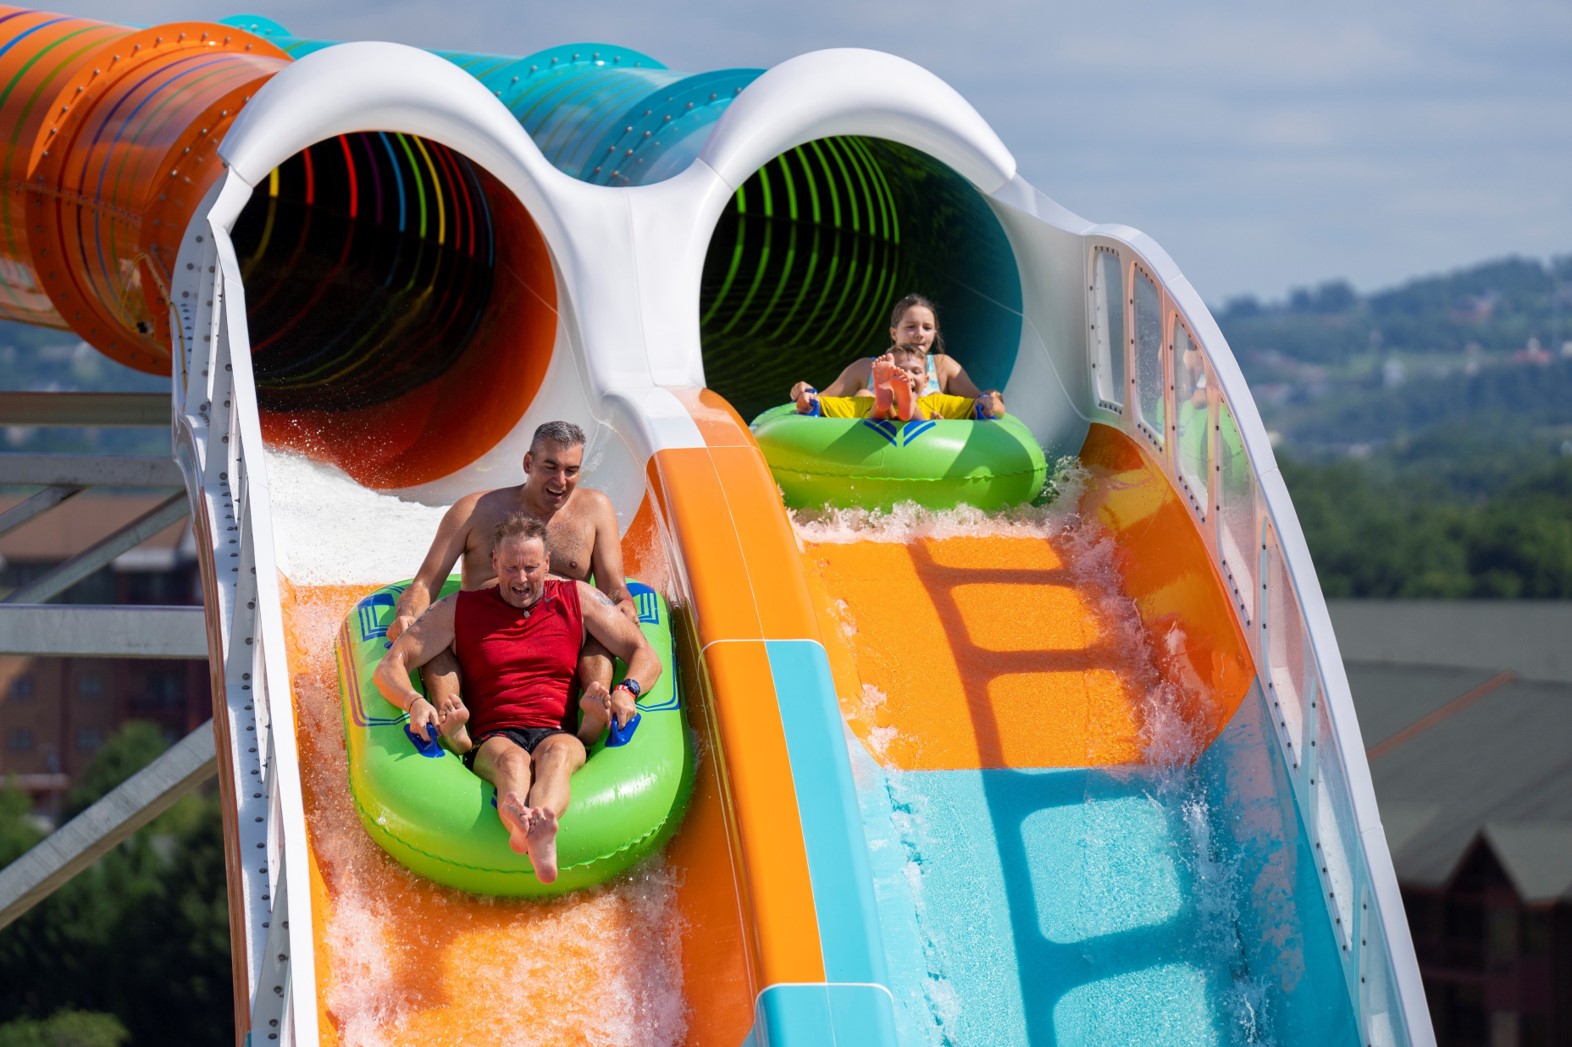 Riders on two inner tubes on water slide in water park